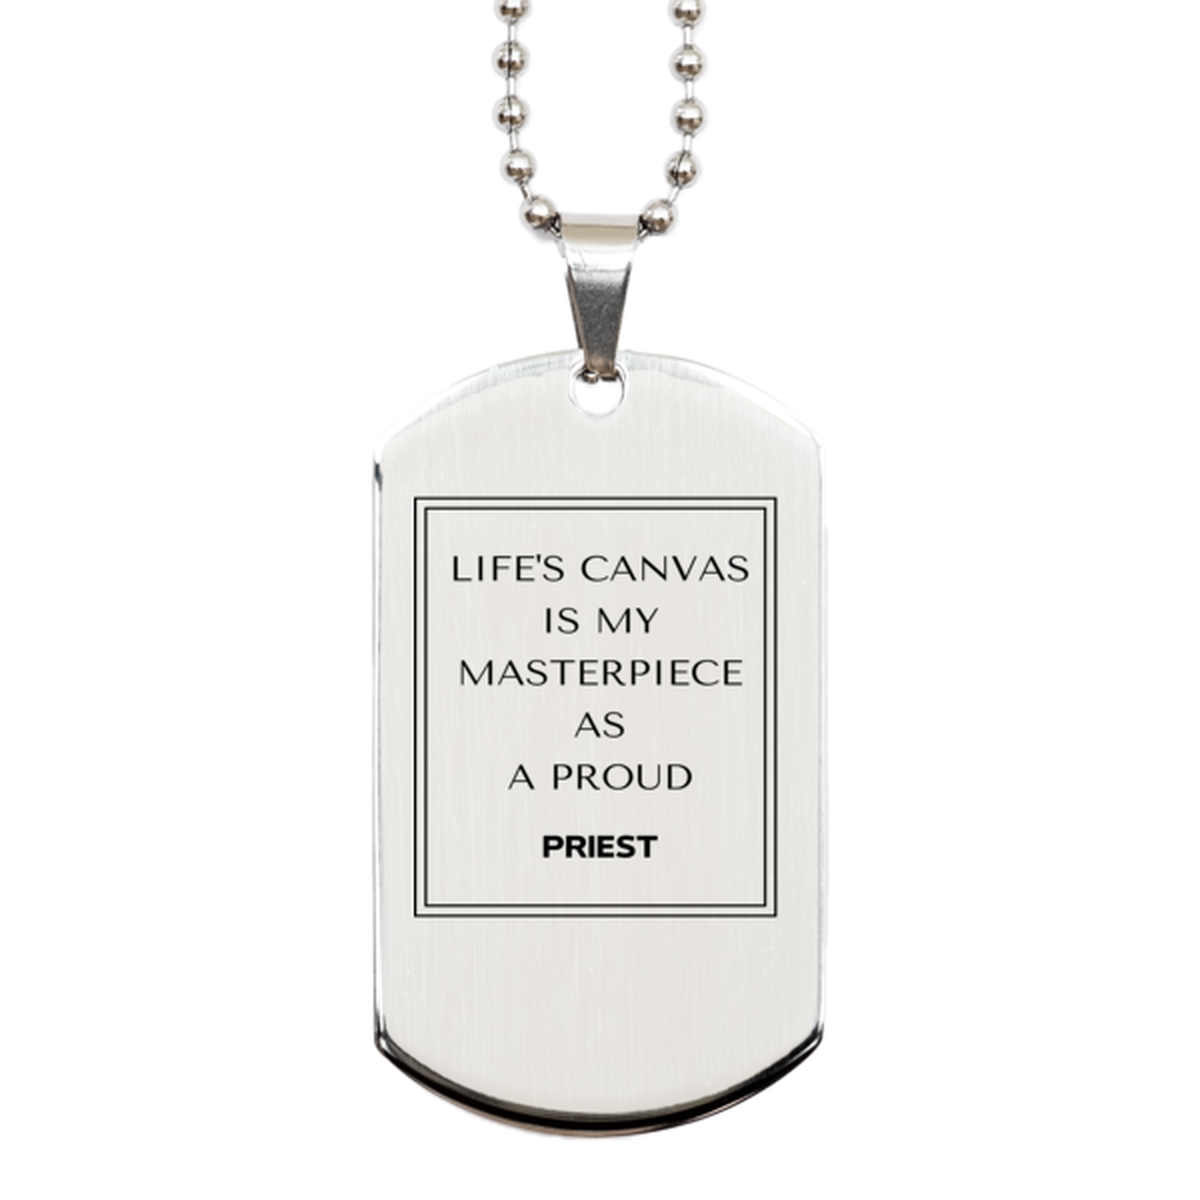 Proud Priest Gifts, Life's canvas is my masterpiece, Epic Birthday Christmas Unique Silver Dog Tag For Priest, Coworkers, Men, Women, Friends